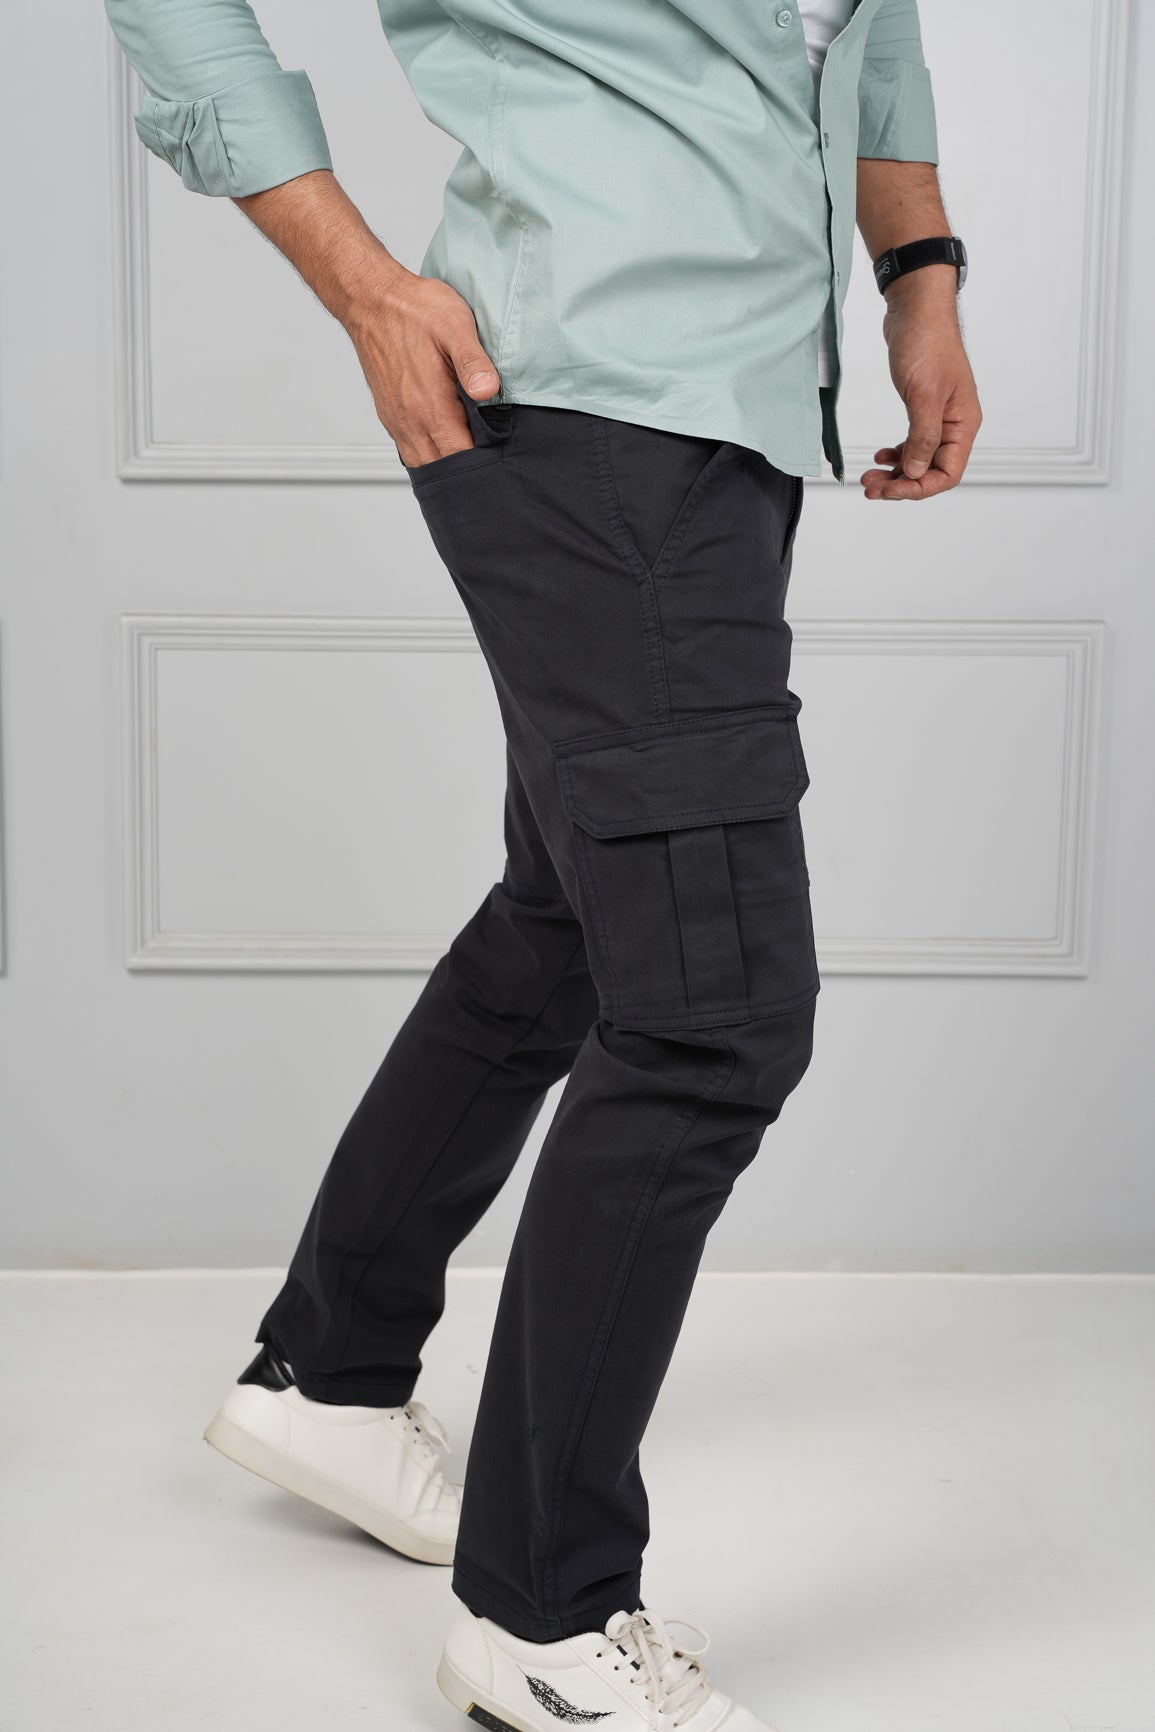 Uneek Mens Cargo Trousers With Knee Pad Pocket Navy  Simon Jersey